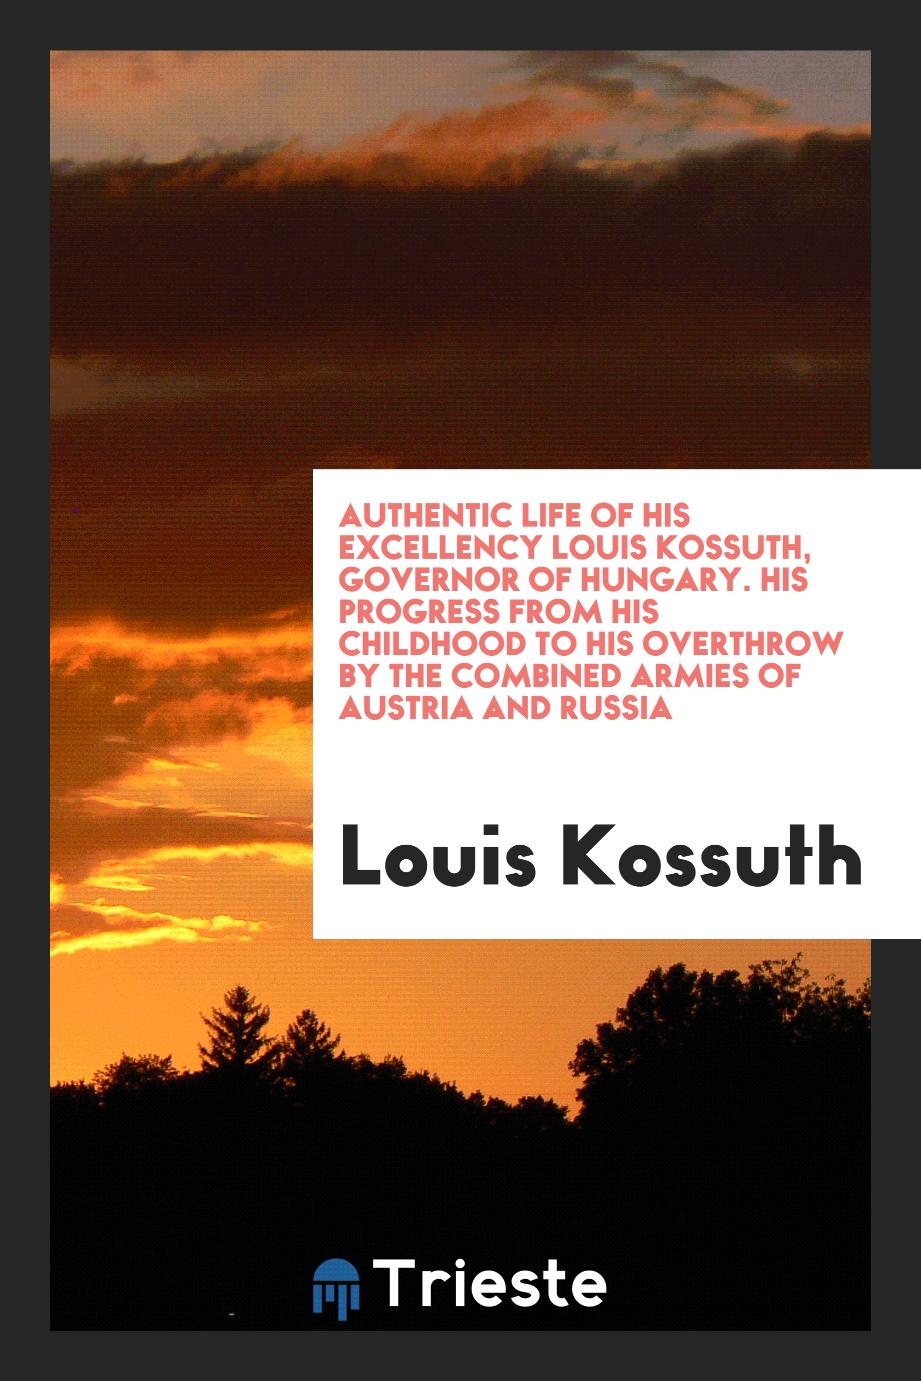 Authentic Life of His Excellency Louis Kossuth, Governor of Hungary. His Progress from His Childhood to His Overthrow by the Combined Armies of Austria and Russia